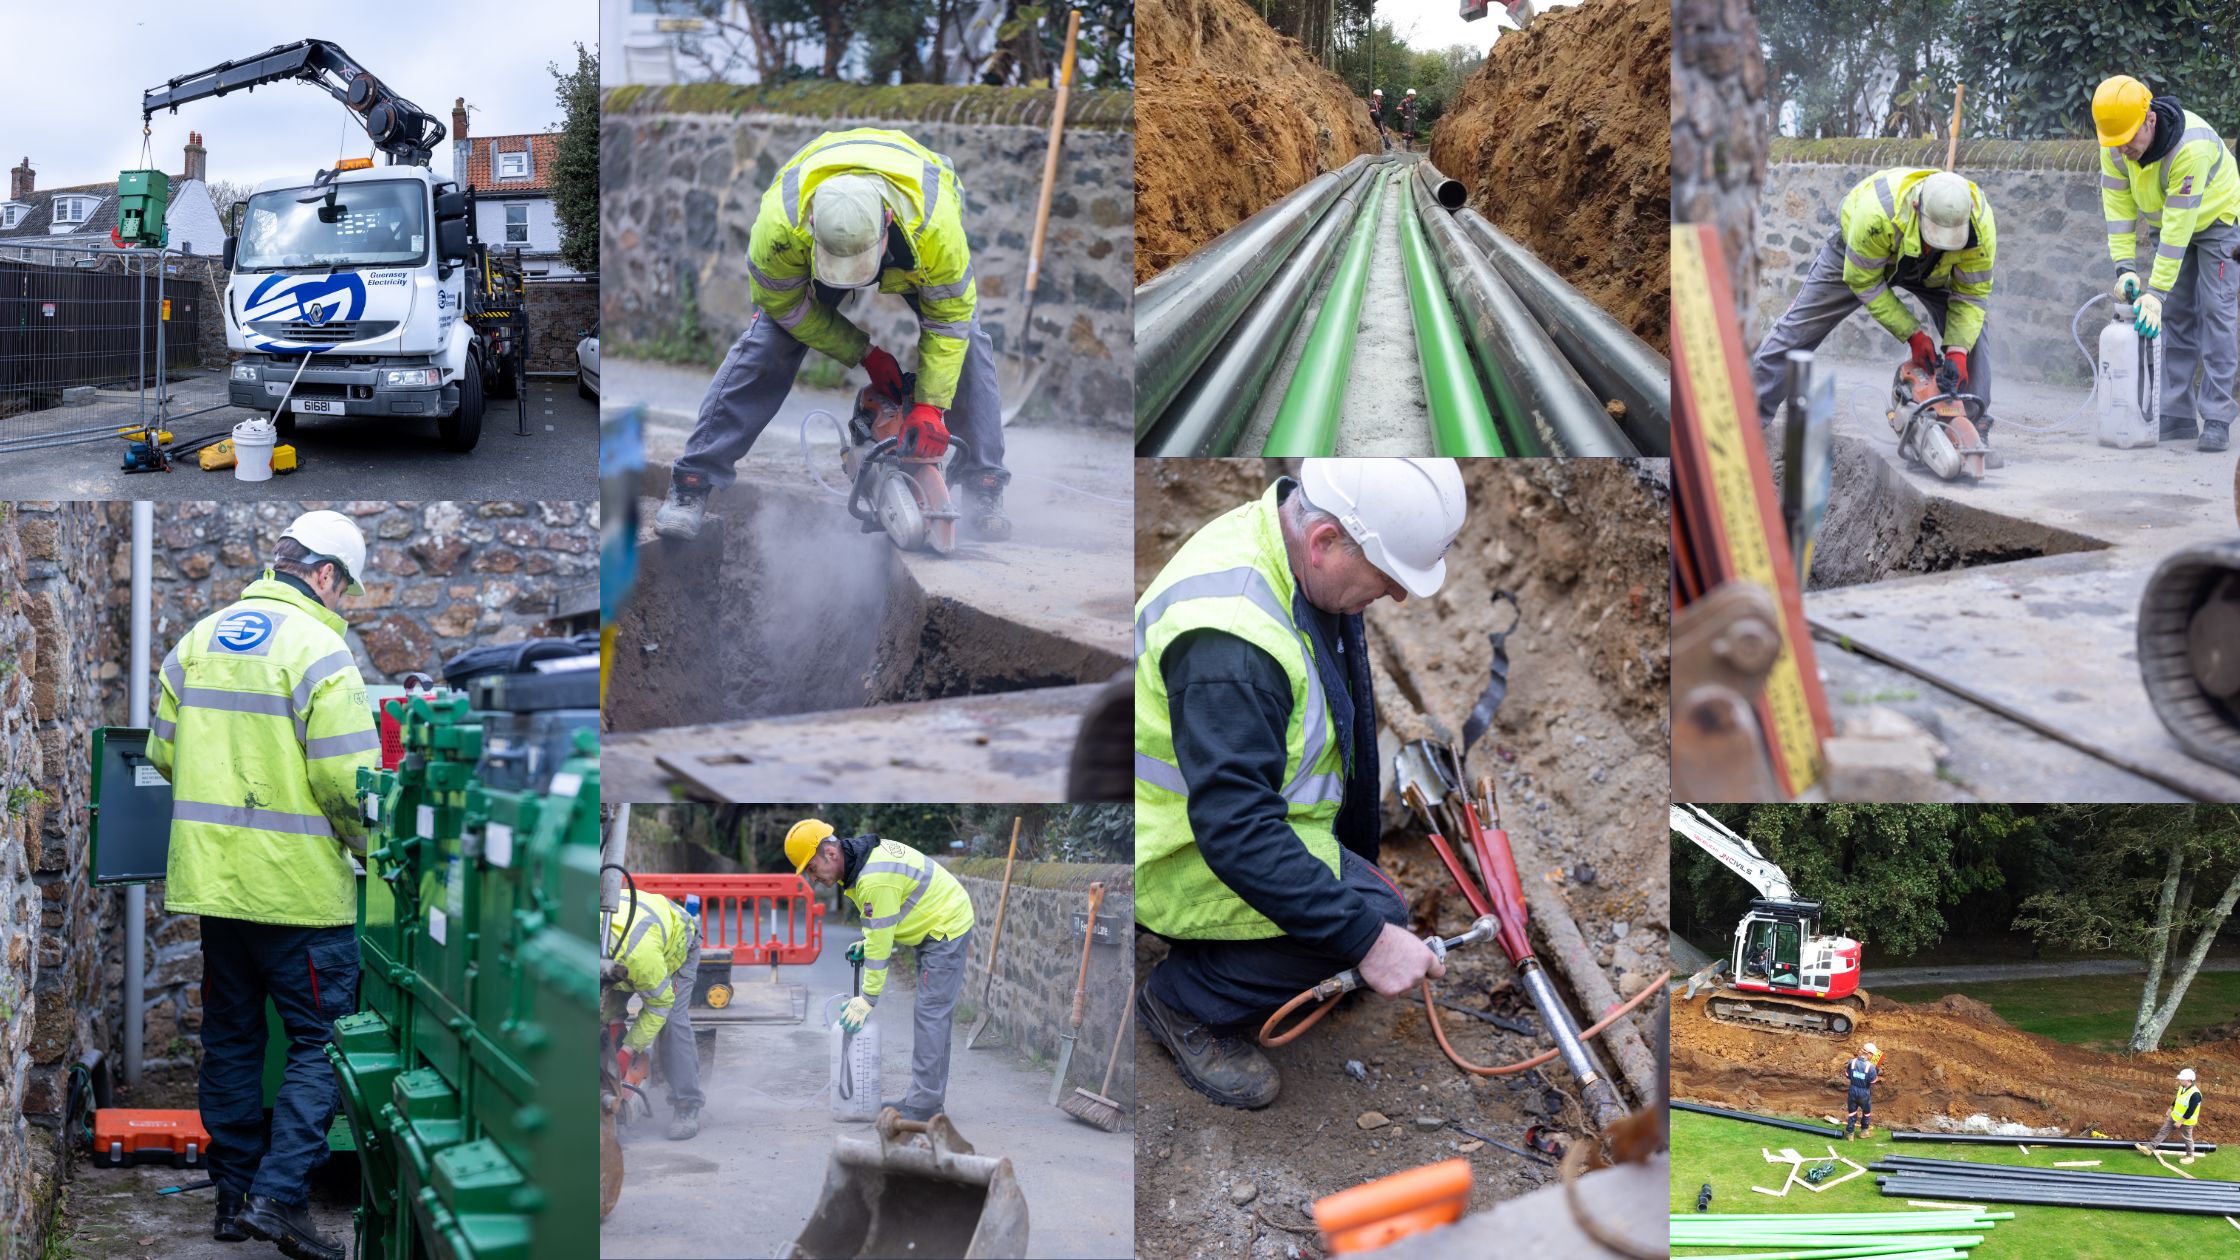 A collage showing Guernsey Electricity employees fixing a cable fault in the road